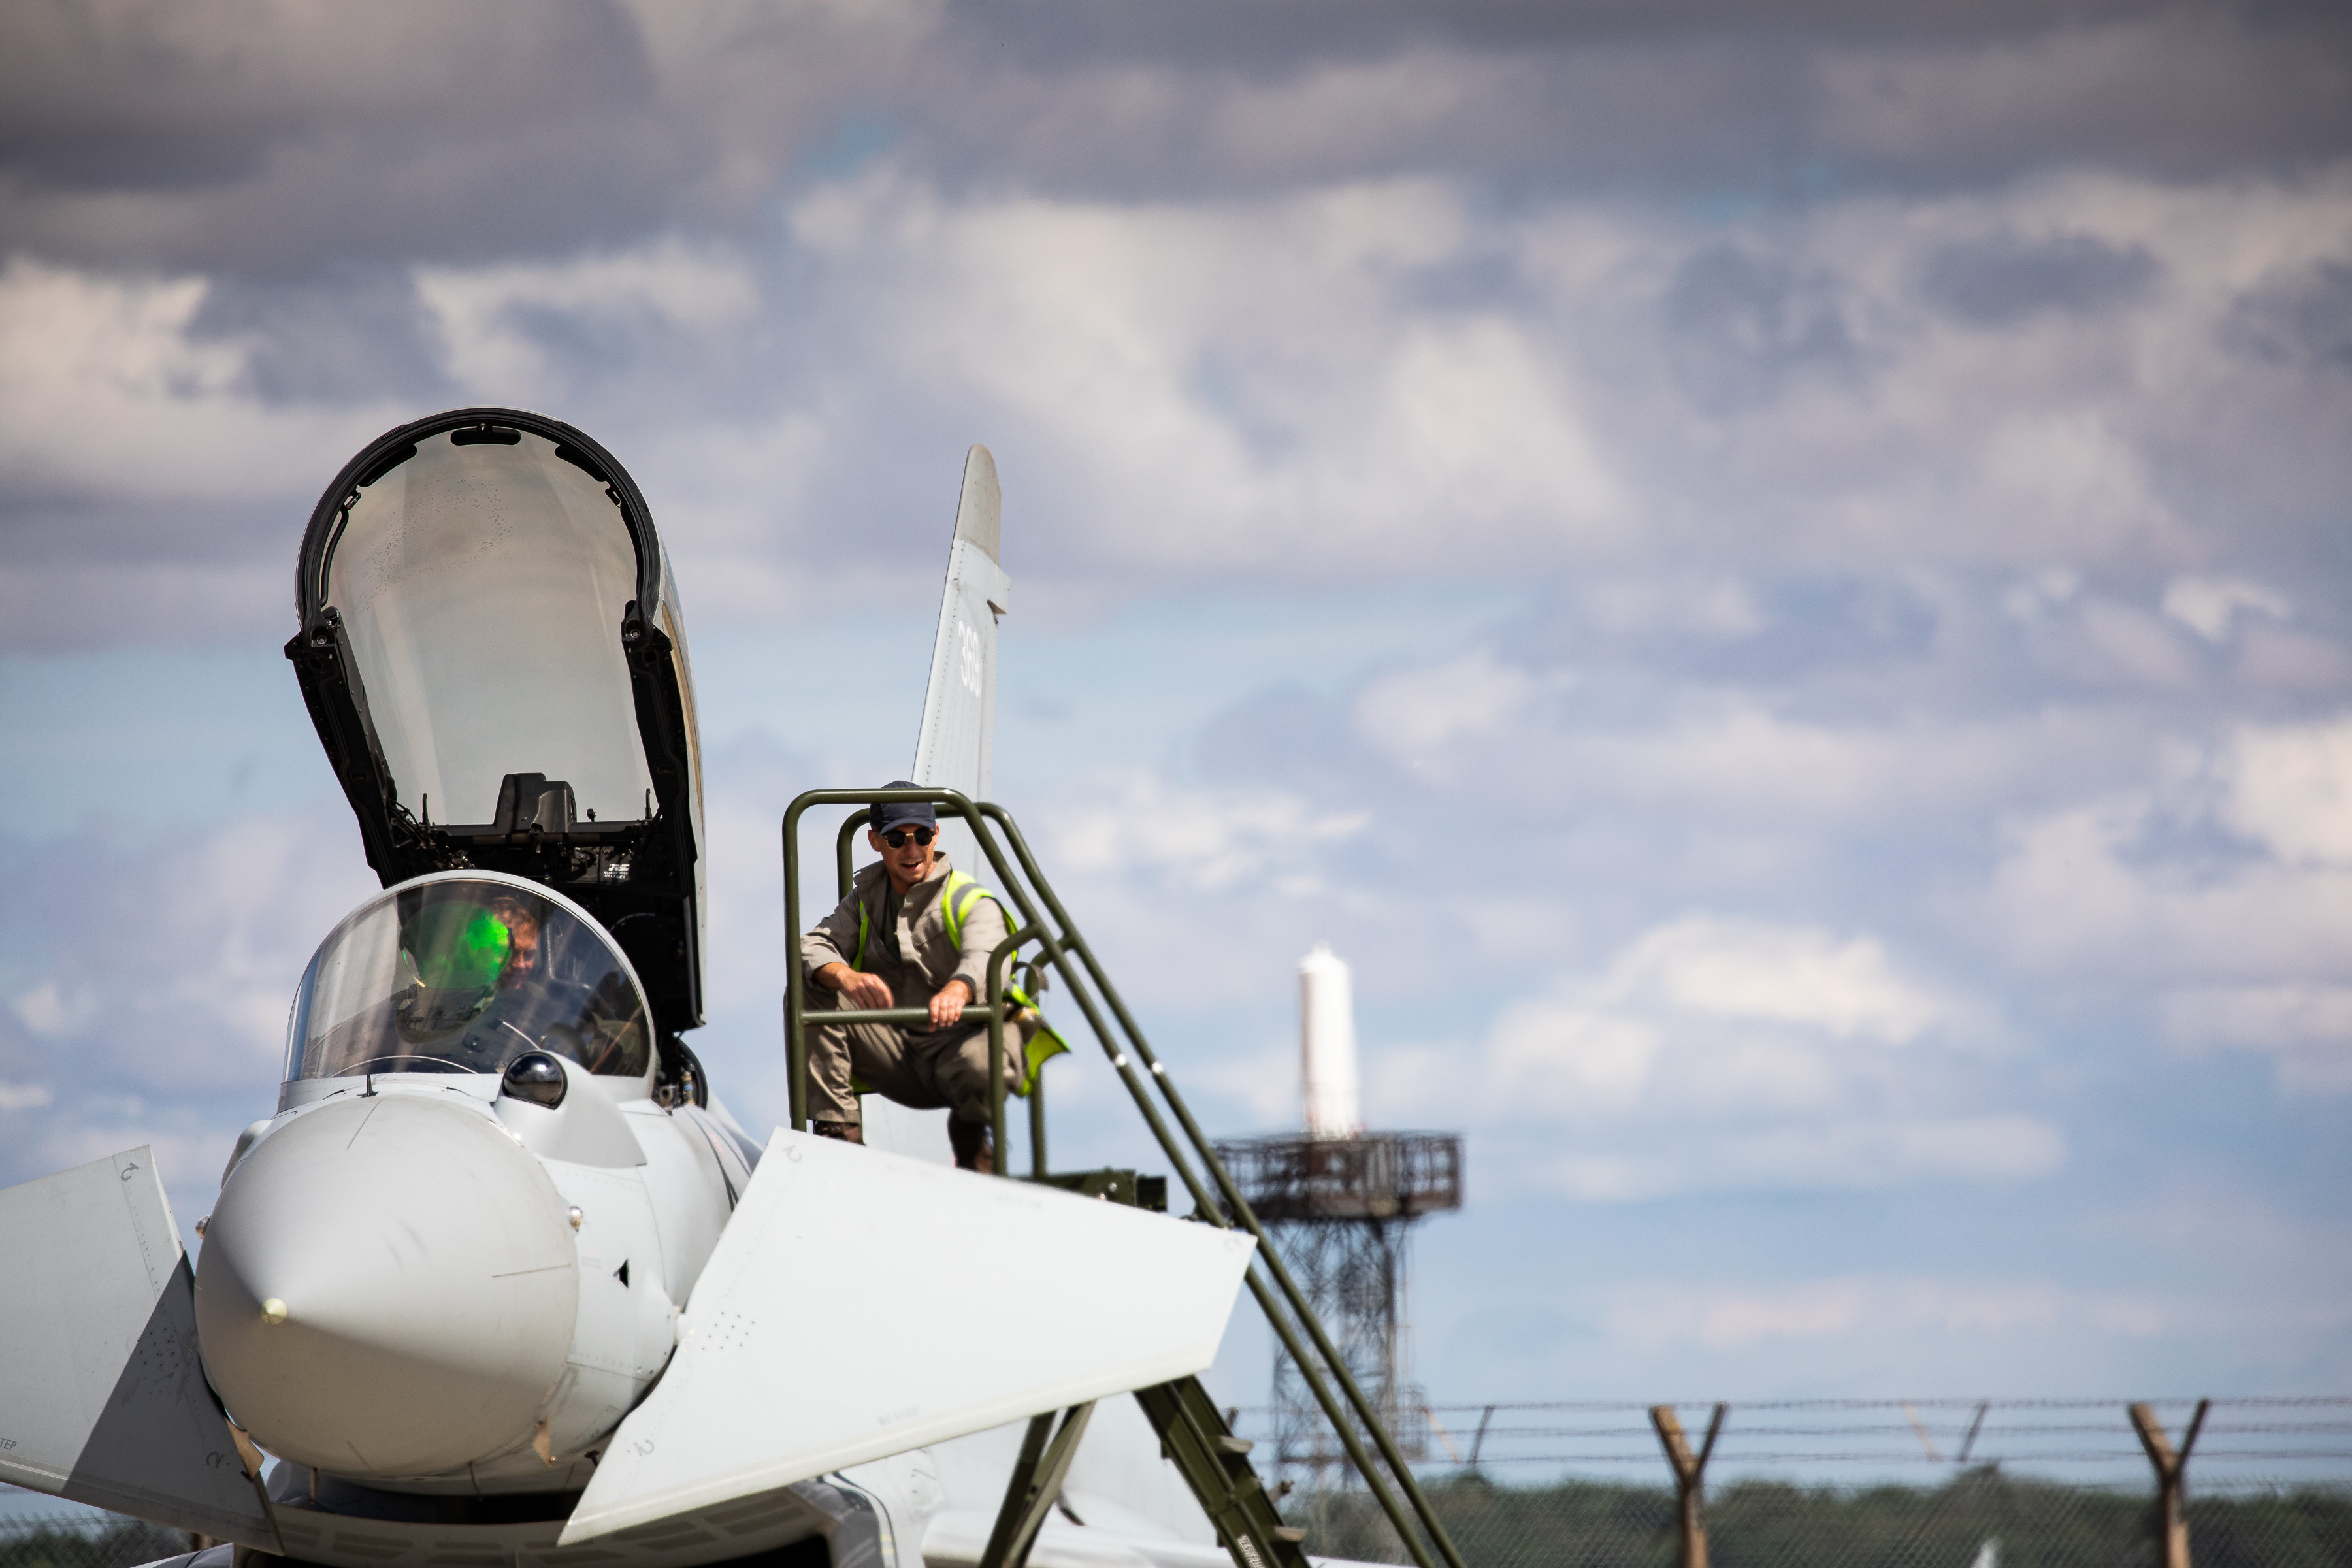 Image shows RAF aviators by the open Typhoon cockpit.